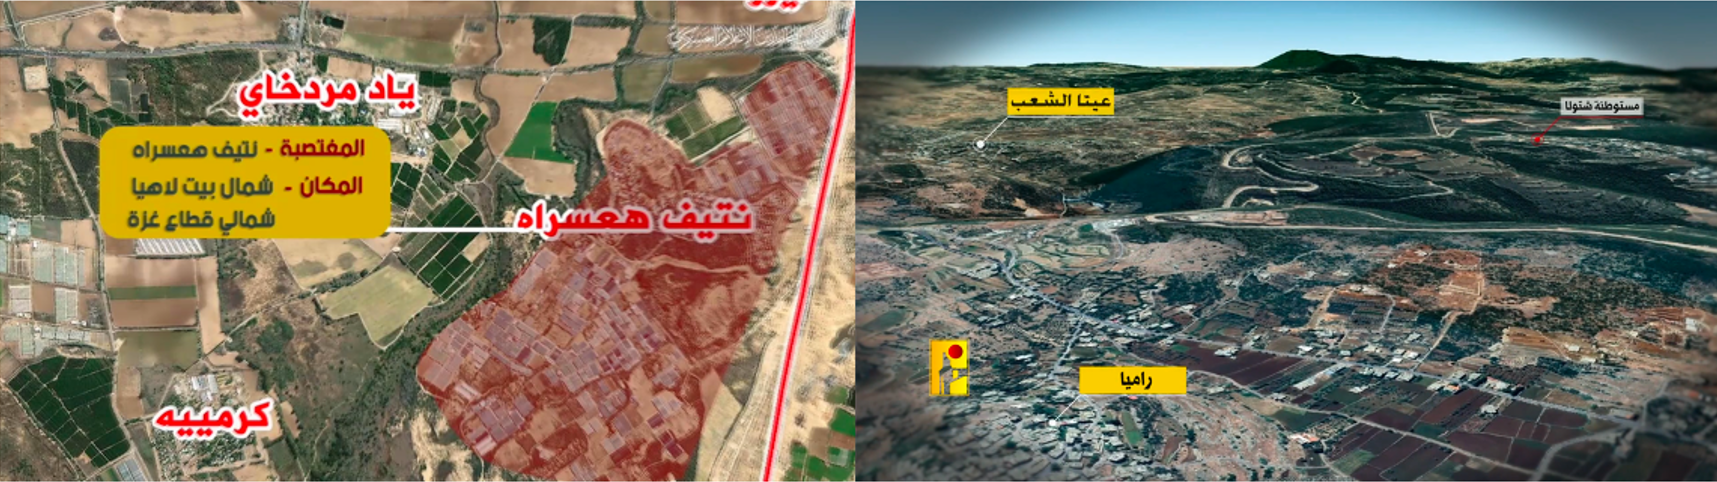 MB video still (left) displaying an annotated map of the Israeli moshav Netiv HaAsara and an annotated Hezbollah map (right) showing the Israeli moshav Shtula and Lebanese villages Ramyah and Ayta ash Shab. (Source: Telegram)